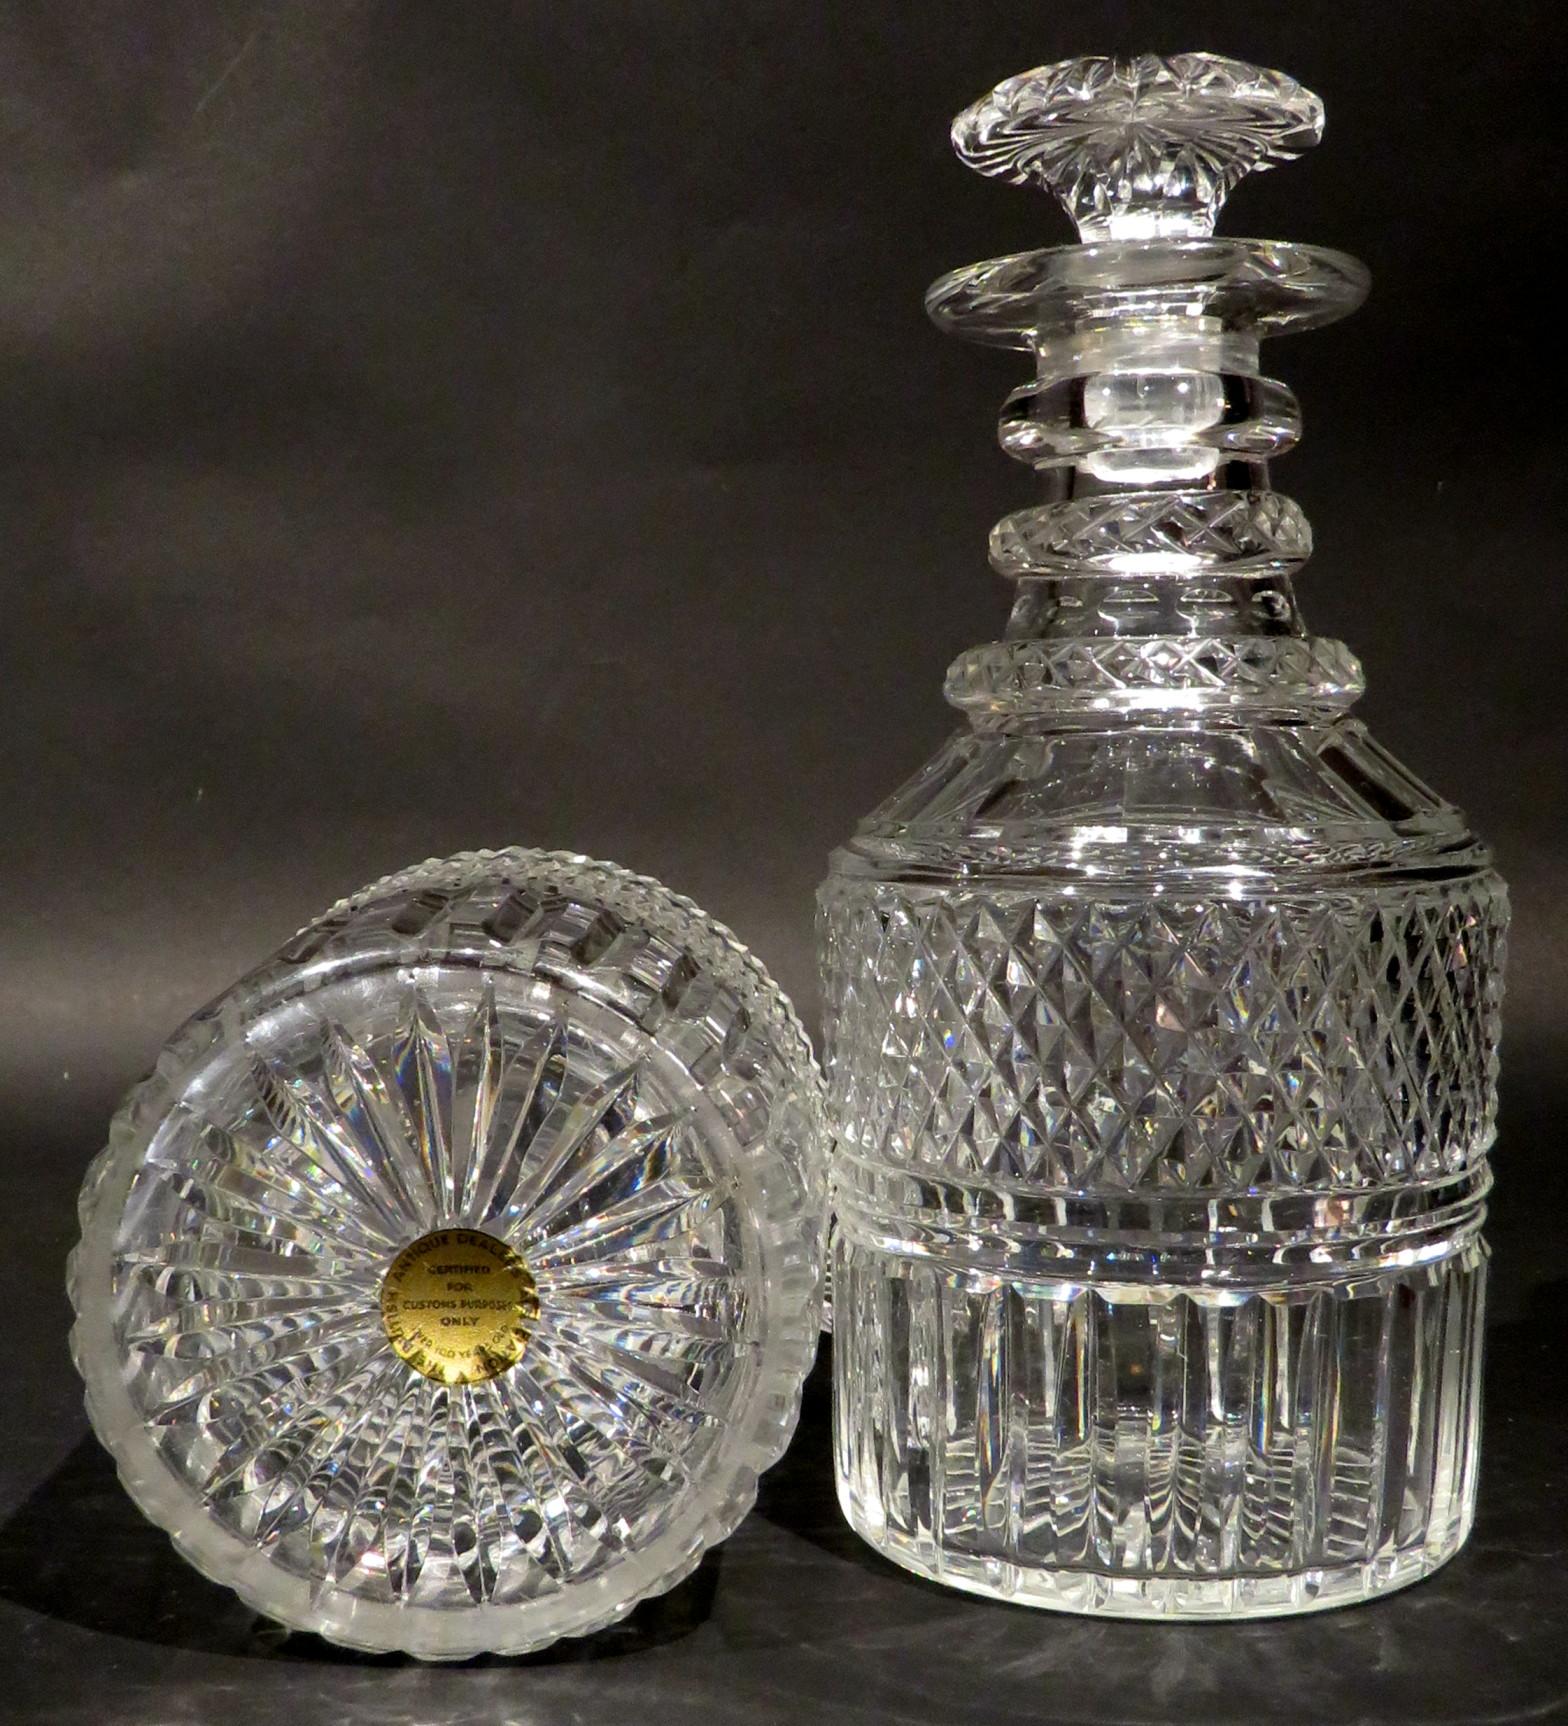 19th Century A Very Good Pair of Regency Period Anglo-Irish Cut Glass Decanters, Circa 1825